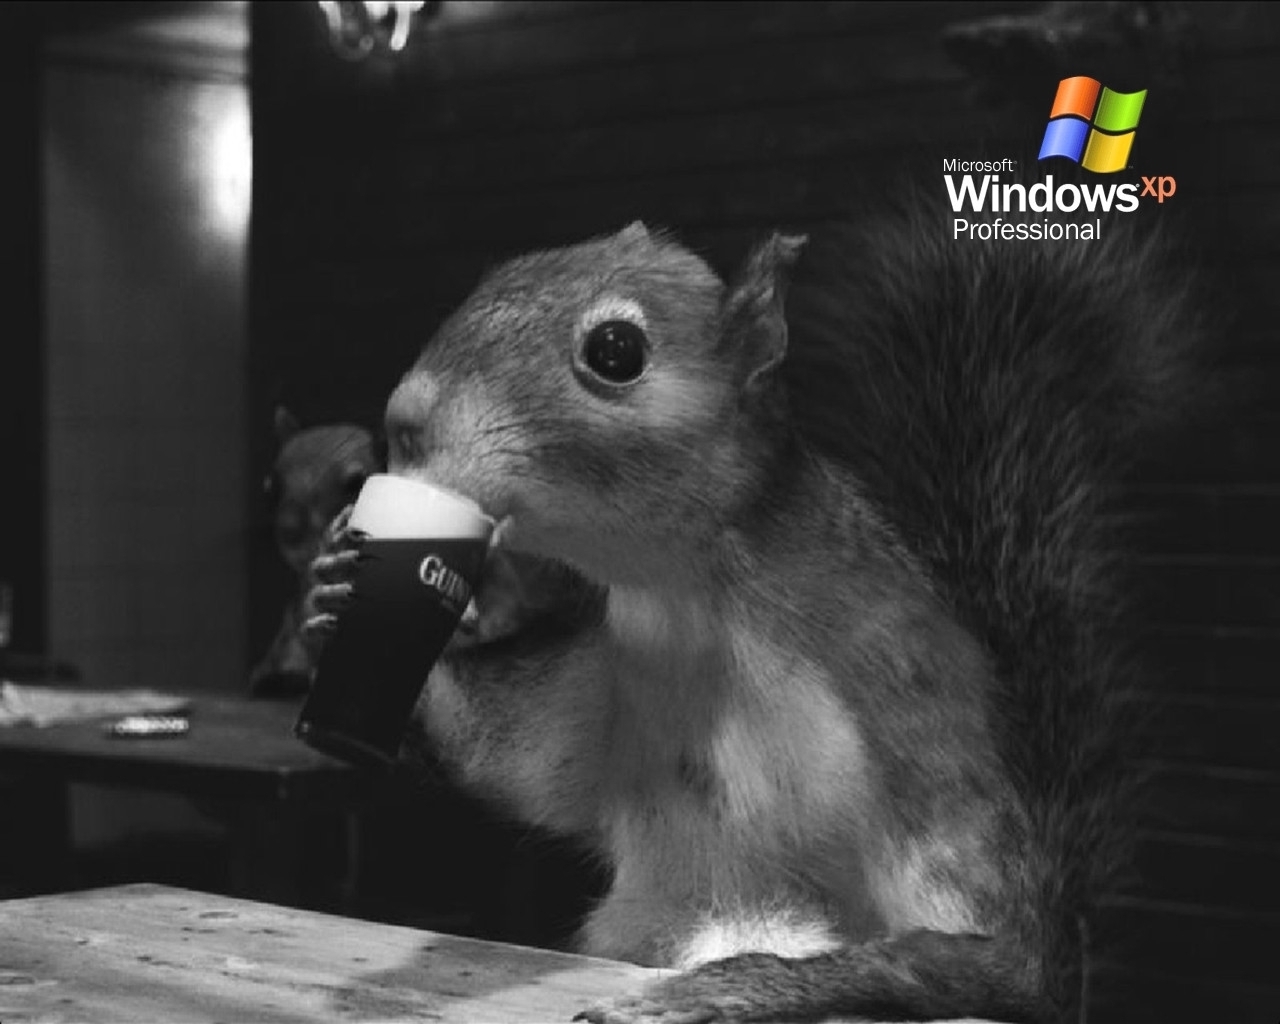 beer, funny, animals, squirrel, rodents, gray HD wallpaper